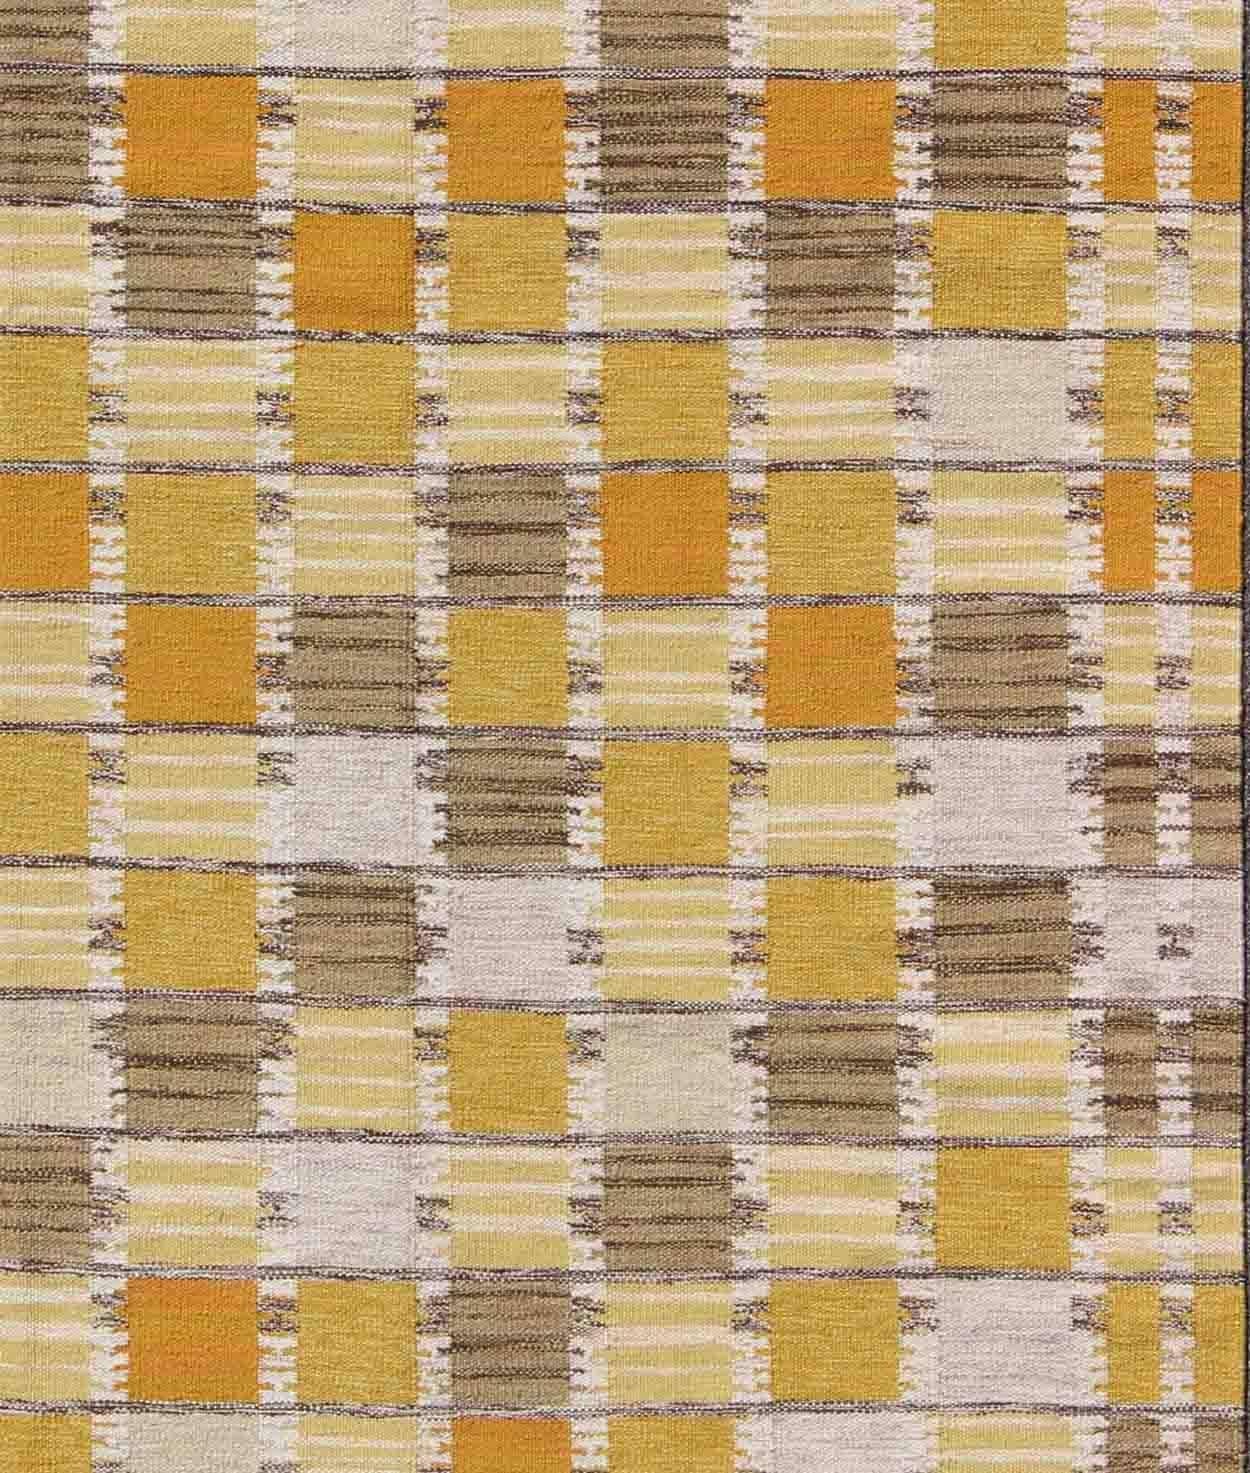 This Scandinavian design flat-weave patterned rug is inspired by the work of Swedish textile designers of the early to mid-20th century. With a unique blend of historical and modern design, this dynamic and exciting composition is beautifully suited